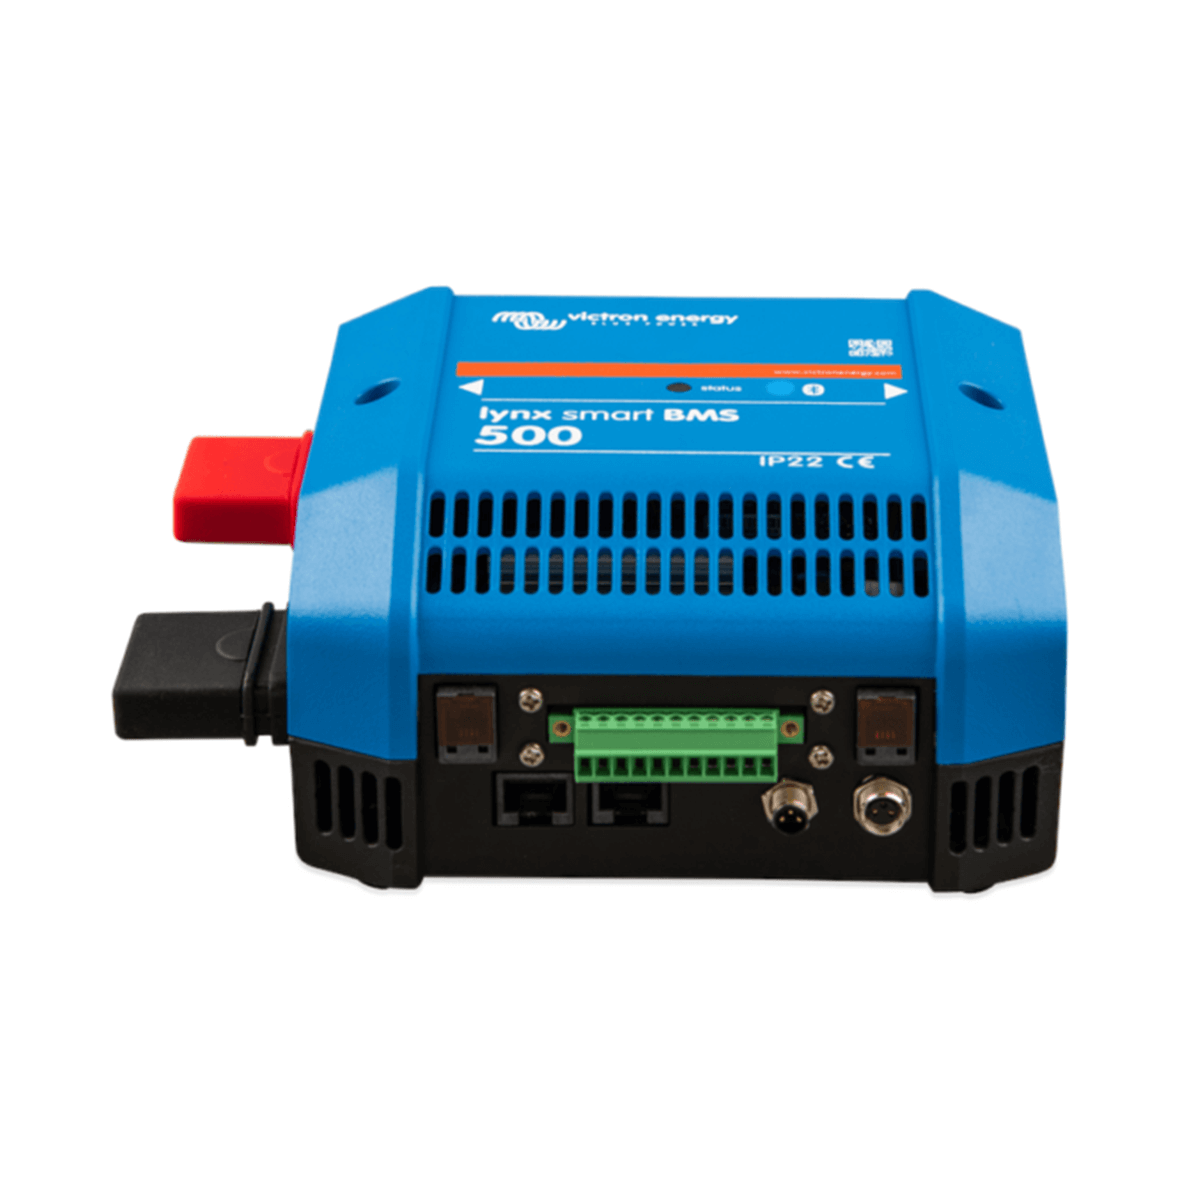 The Victron Lynx Smart BMS and Smart Shunt Battery Management - 500A device by Victron Energy features various ports and connectors on the front panel.